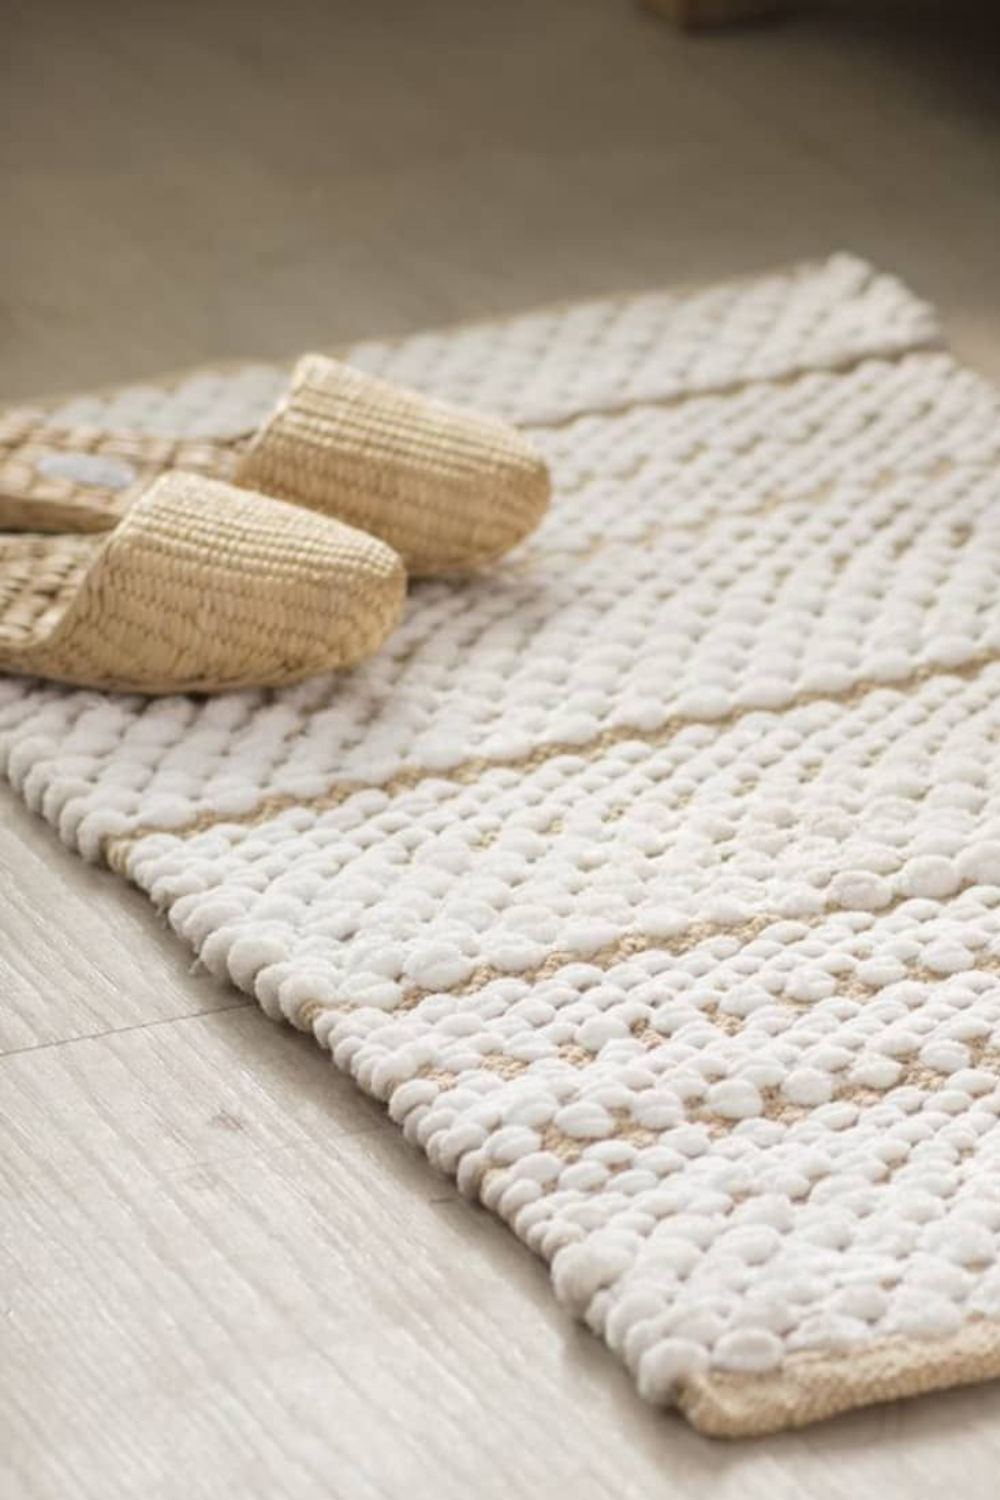 Discover nontoxic, eco-friendly air fresheners for a plant-based lifestyle. Swap traditional products for toxin-free alternatives like Organic Cotton Bath Mat. Embrace a healthier, greener approach to home fragrances today